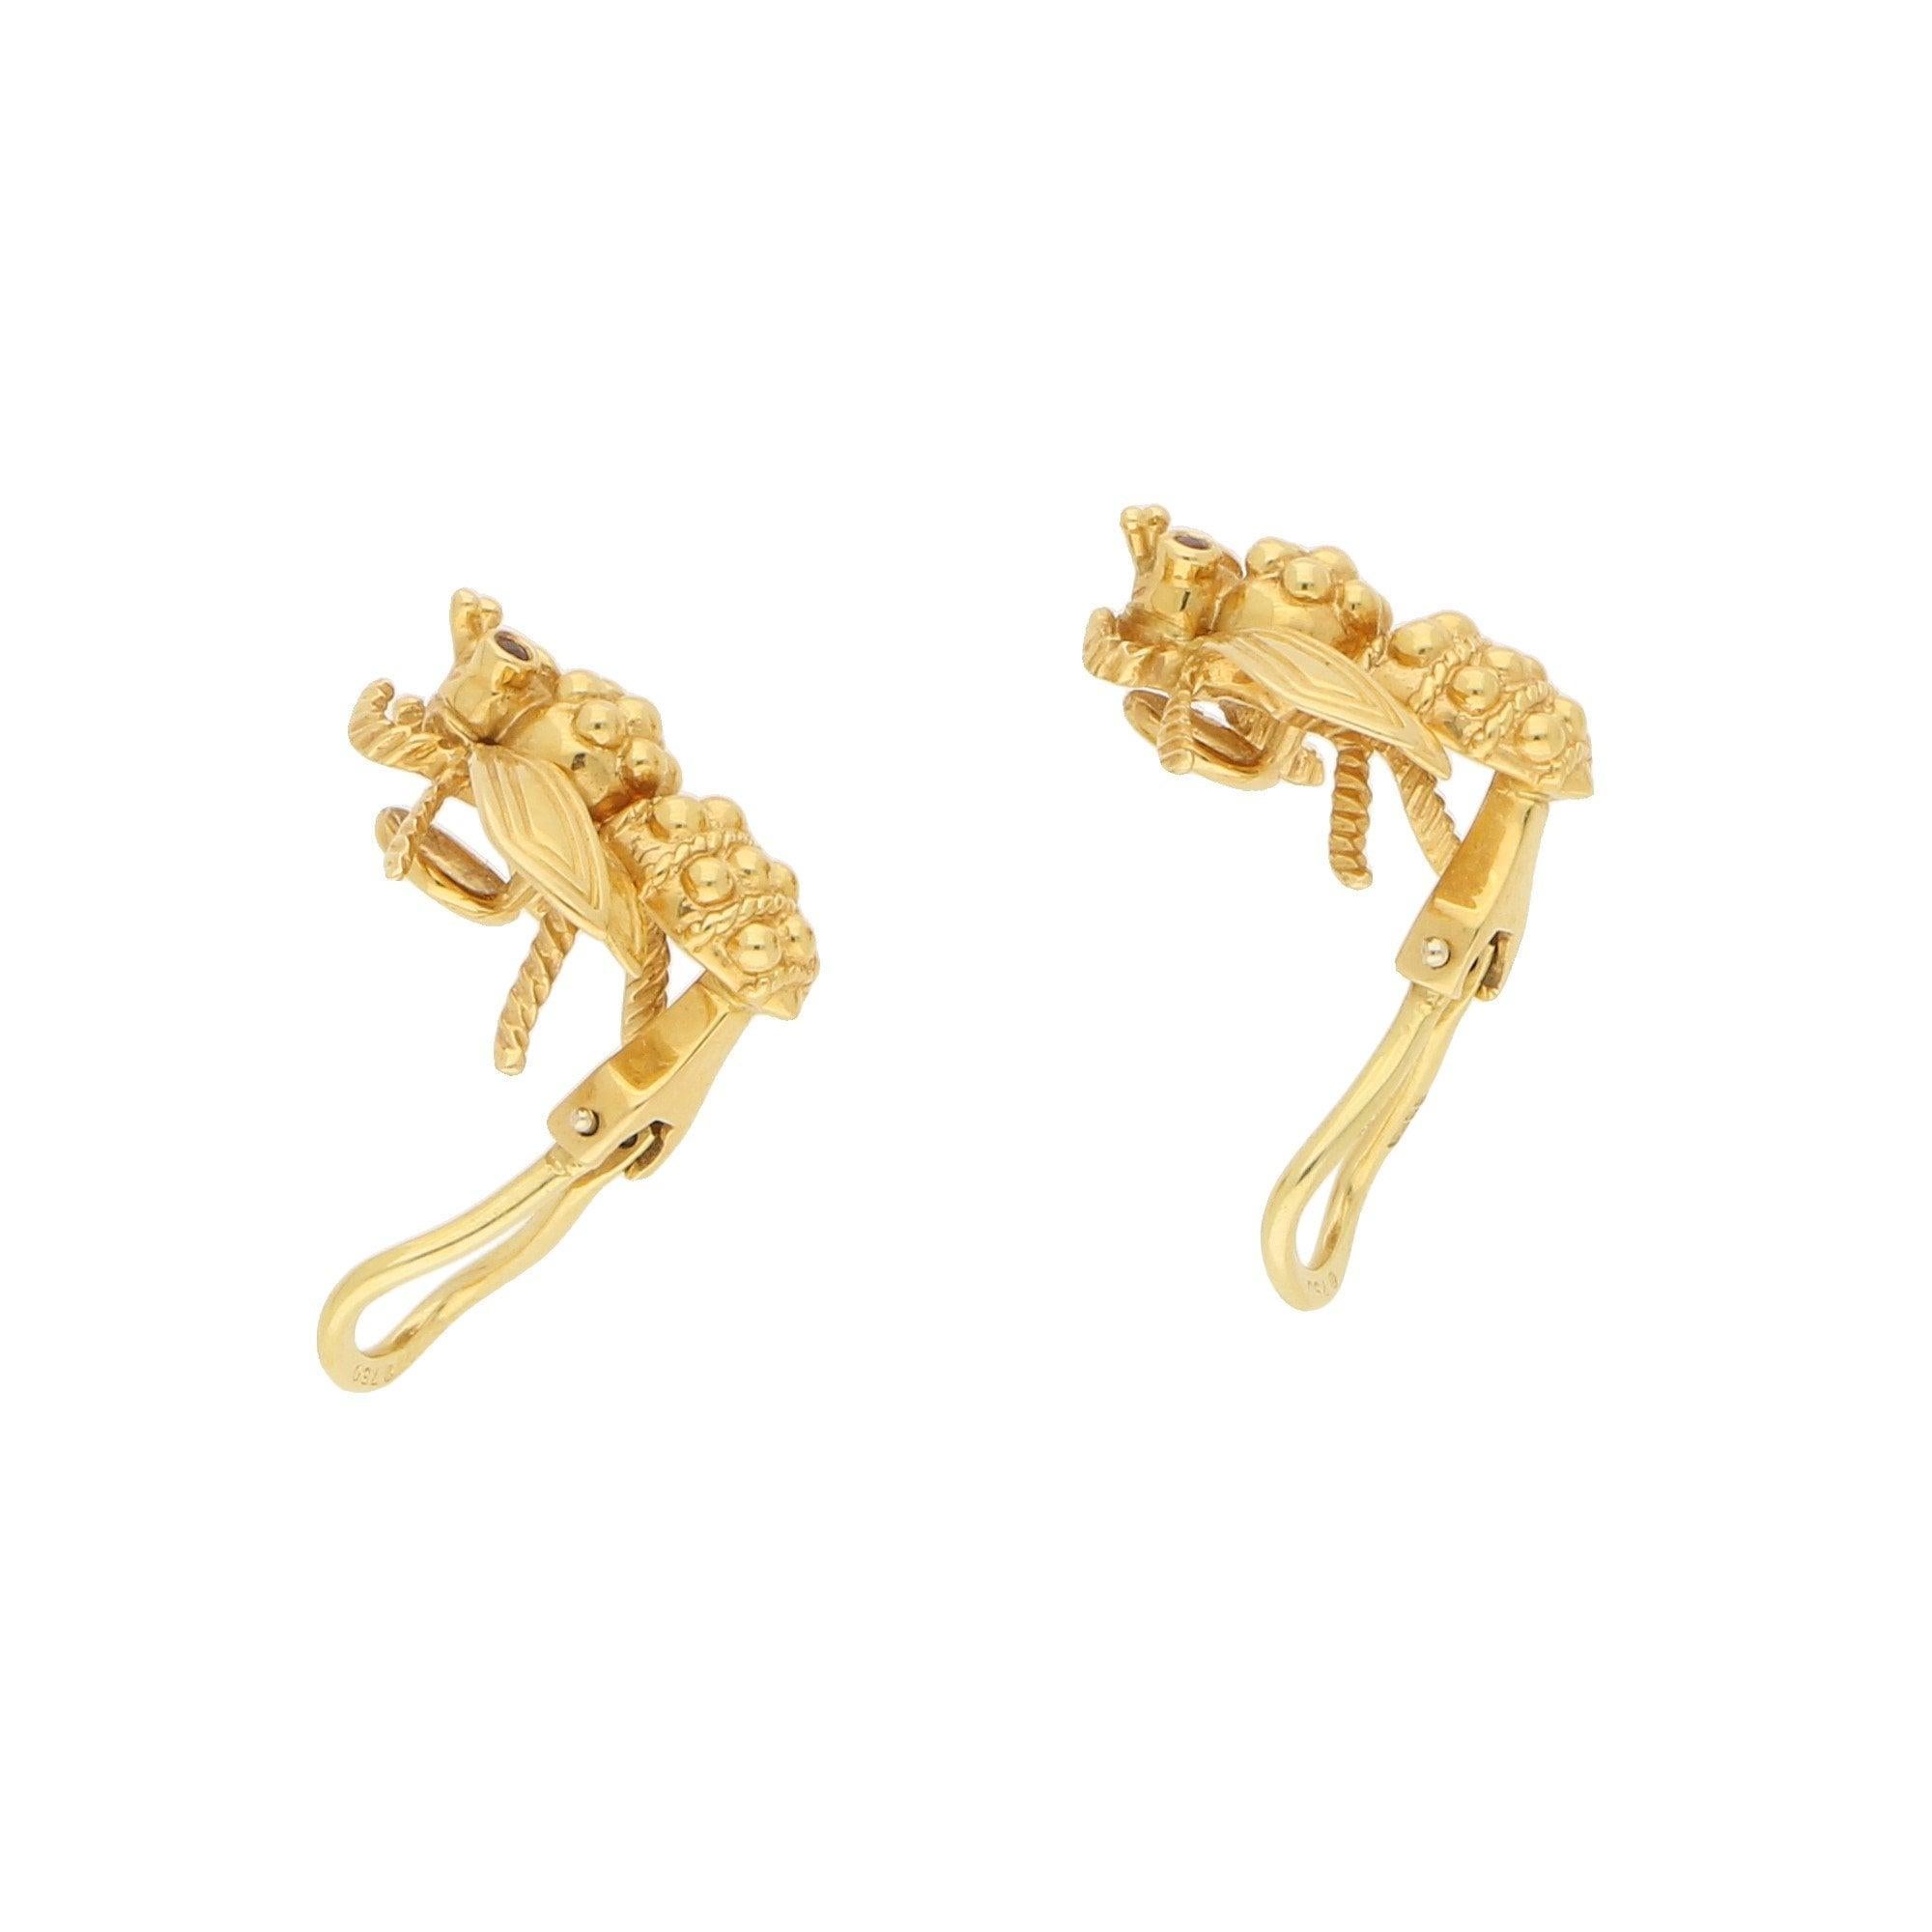 A lovely pair of vintage Tiffany & Co. ruby-eyed queen bee earrings in 18-karat yellow gold, circa 1960. Each earring is designed as a stylized queen bee in yellow gold, the body composed of gold beads within ropework detailing, the textured head